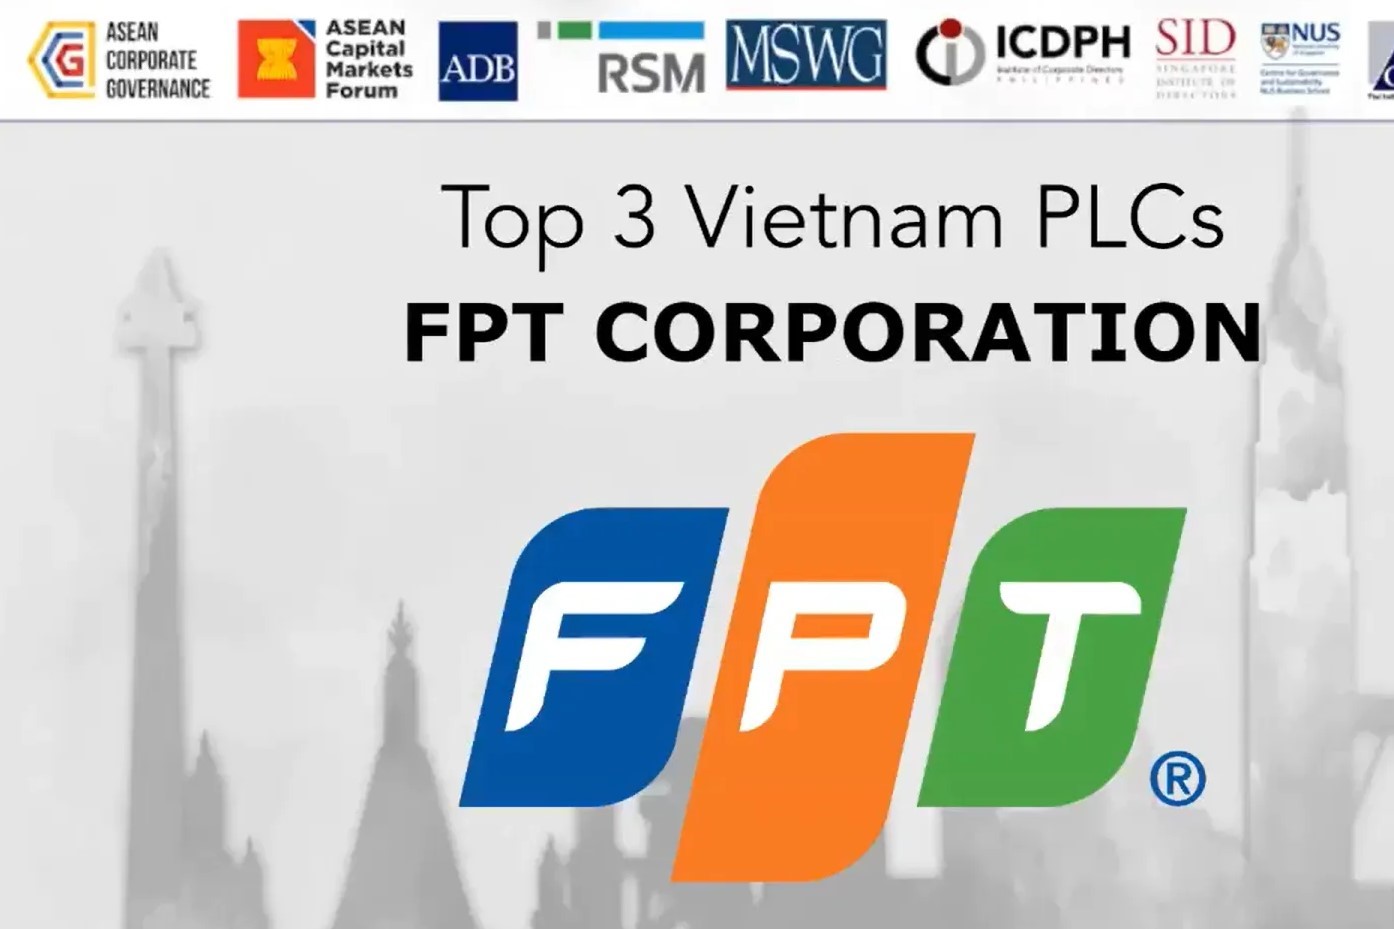 FPT ranks among the Top 3 Vietnamese Publicly Listed Companies on ASEAN's CG Score List